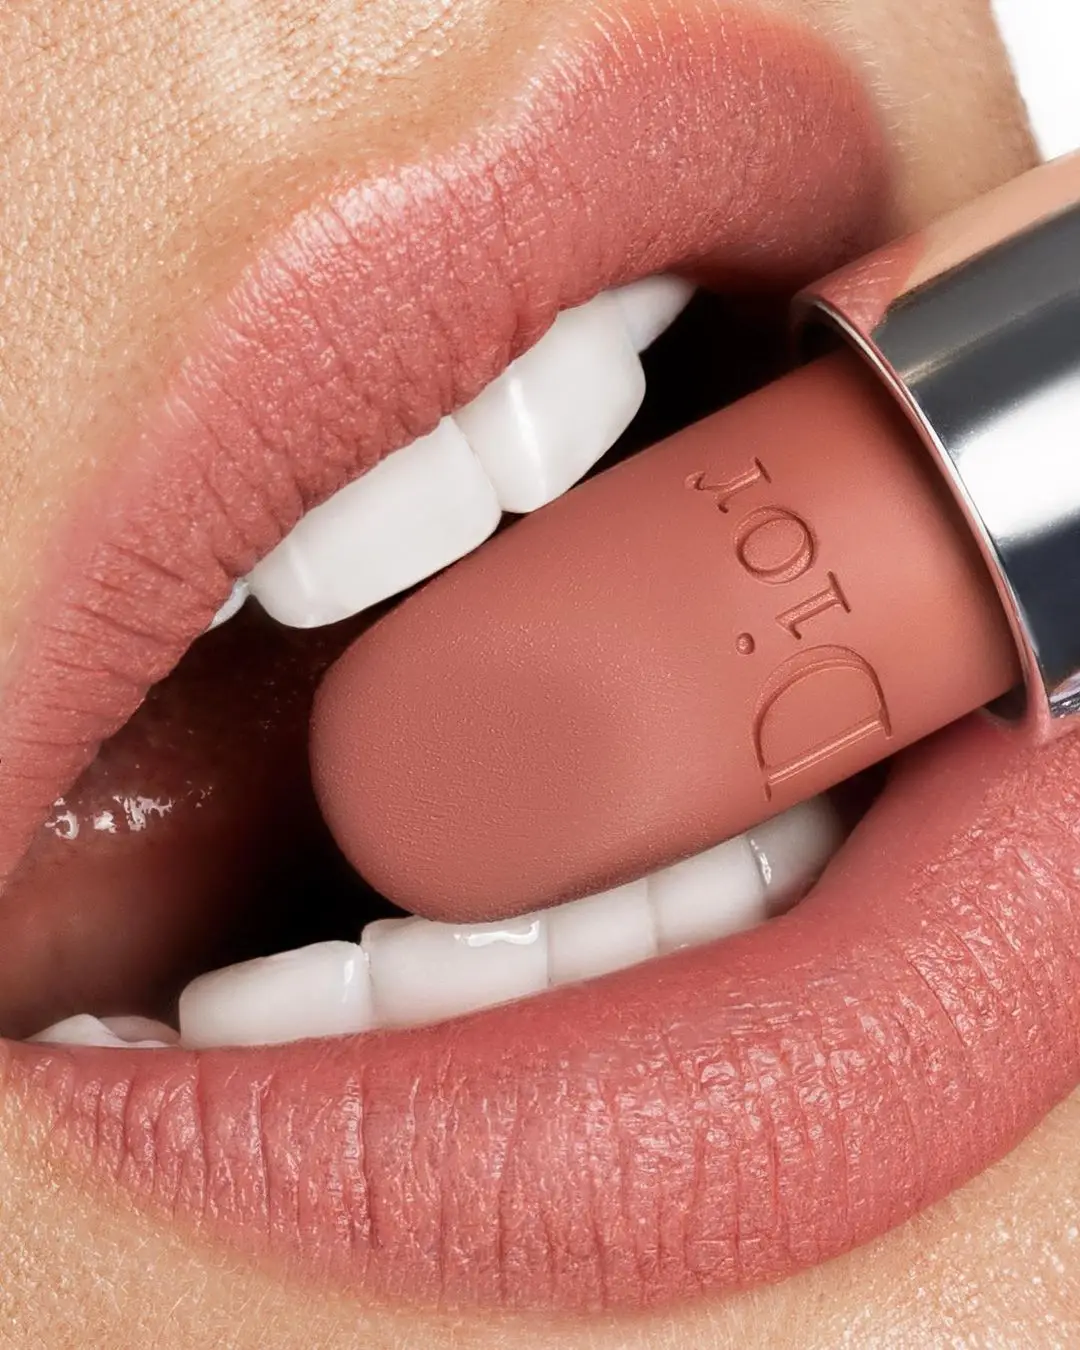 Long Wear Lip Colors That Wont Disappoint or Disappear ...